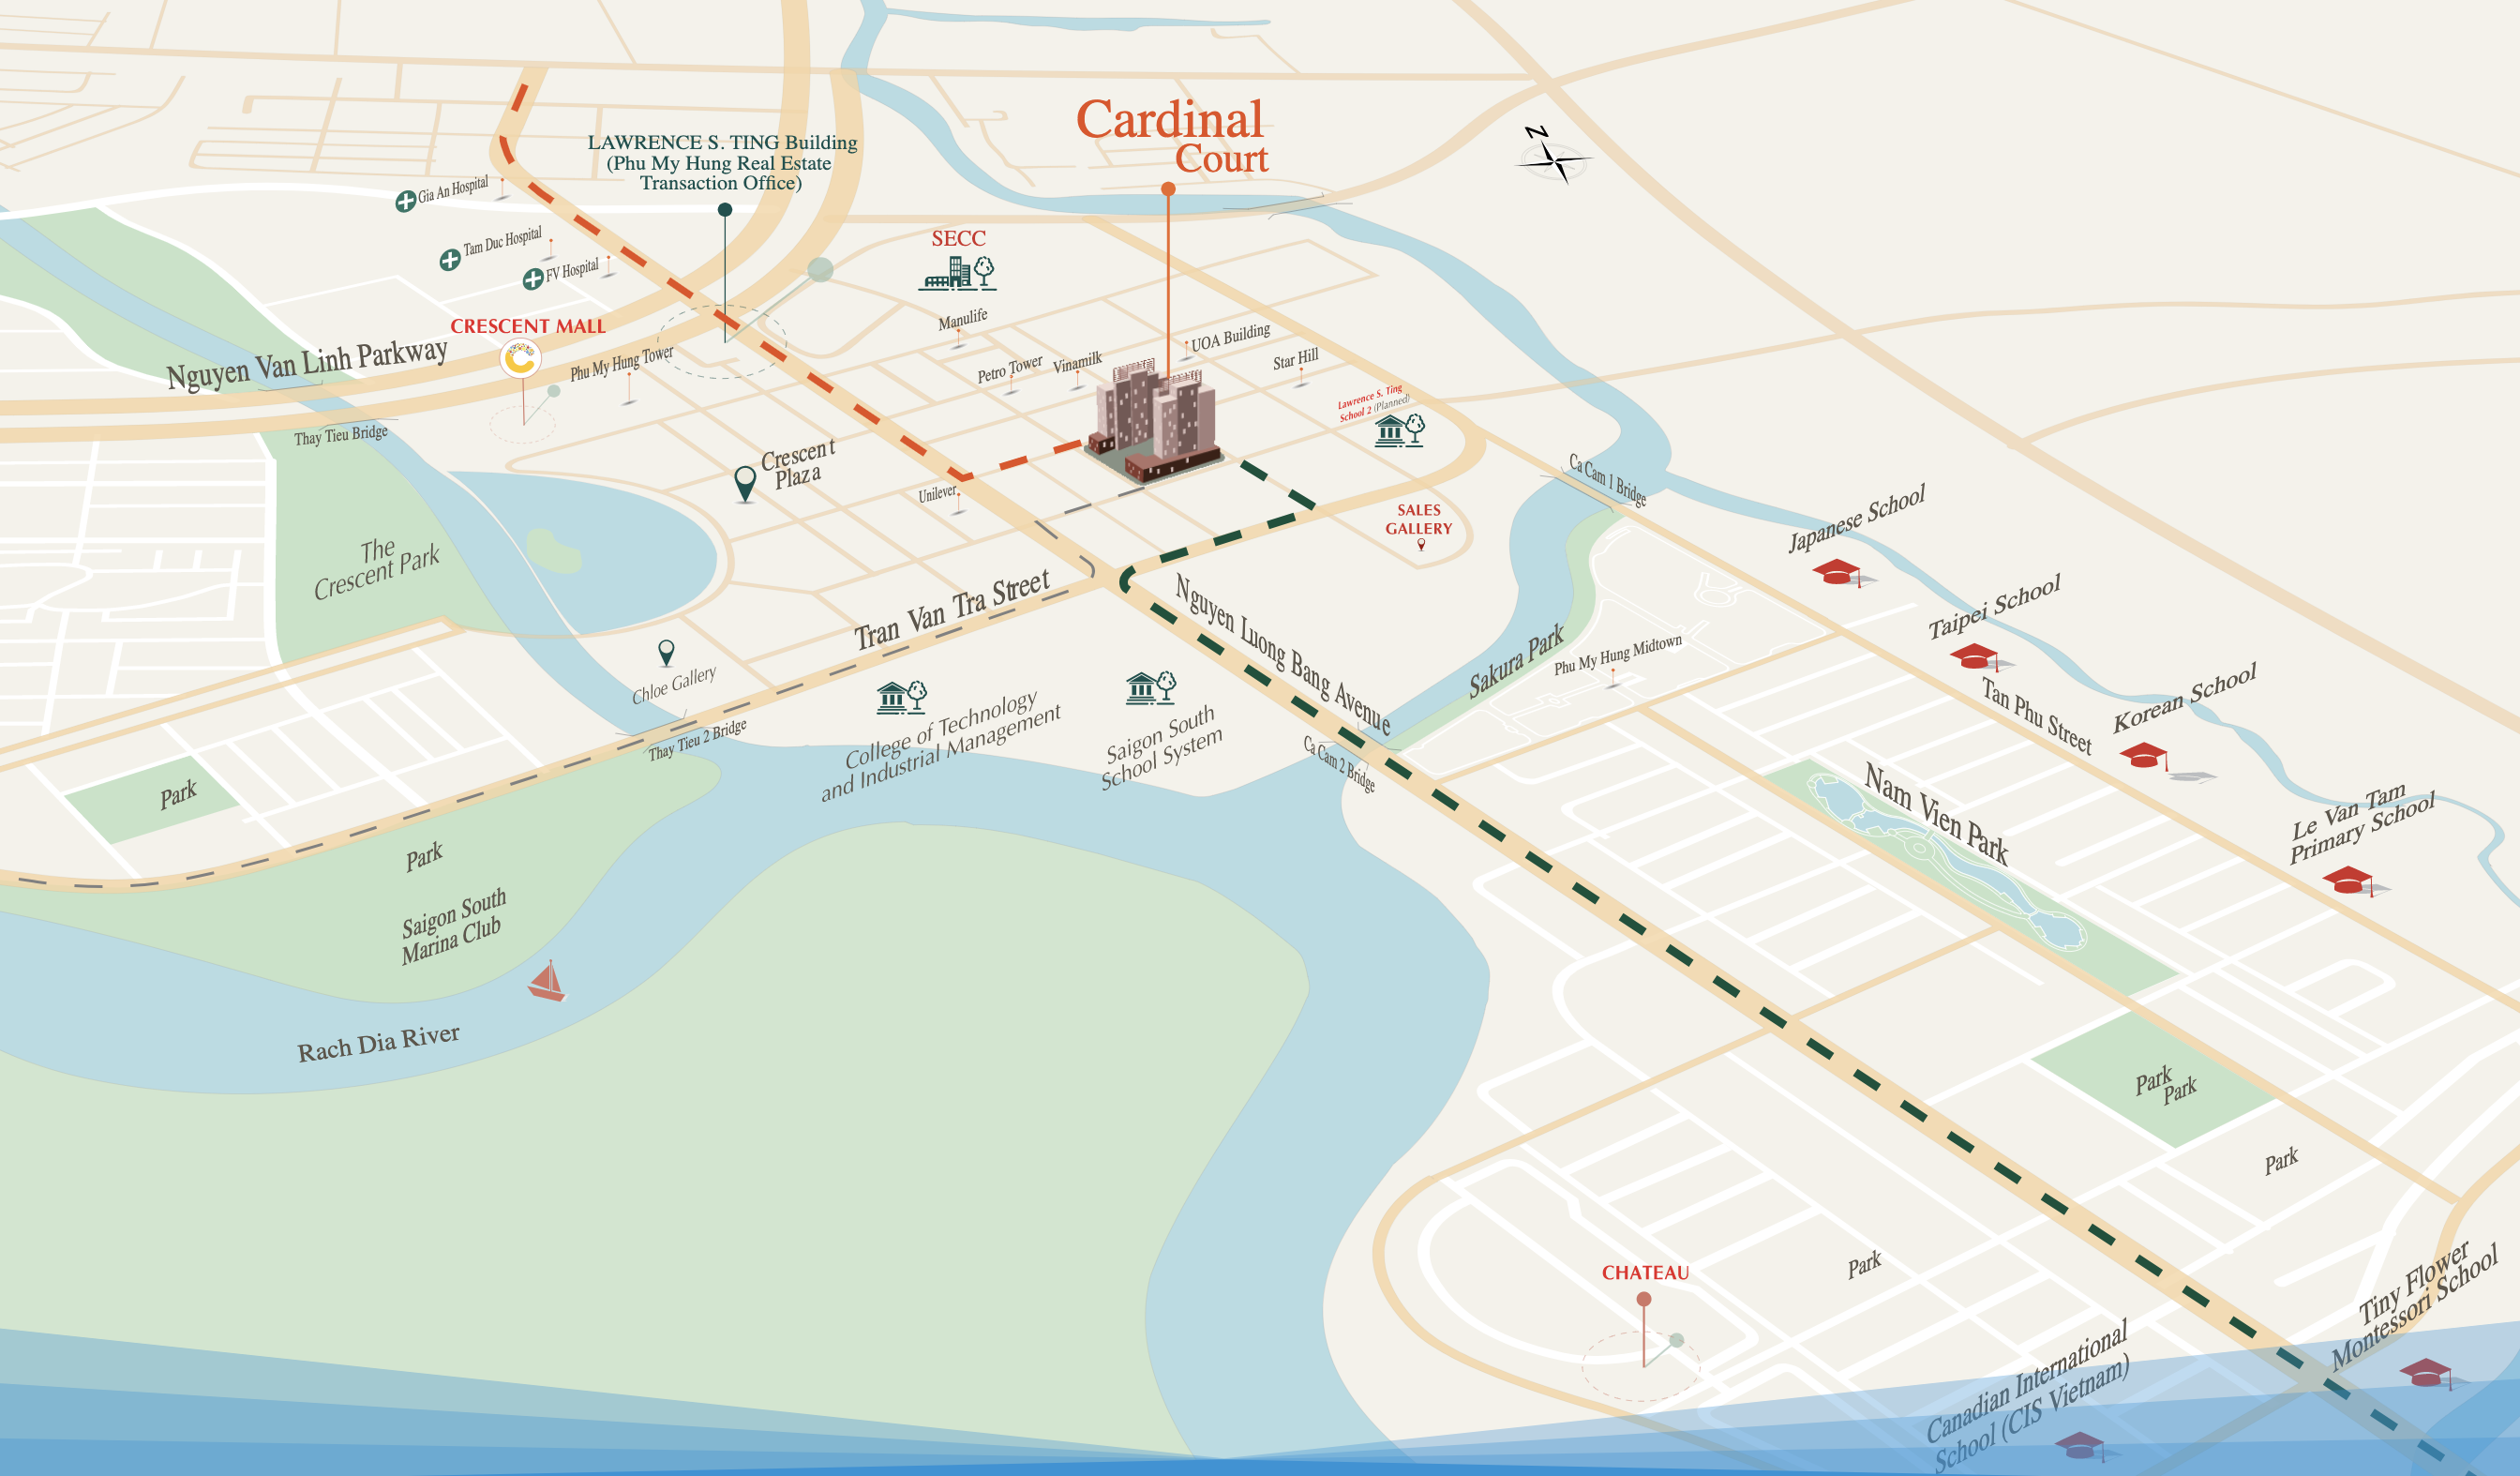 Location of Cardinal Court Phu My Hung project, District 7